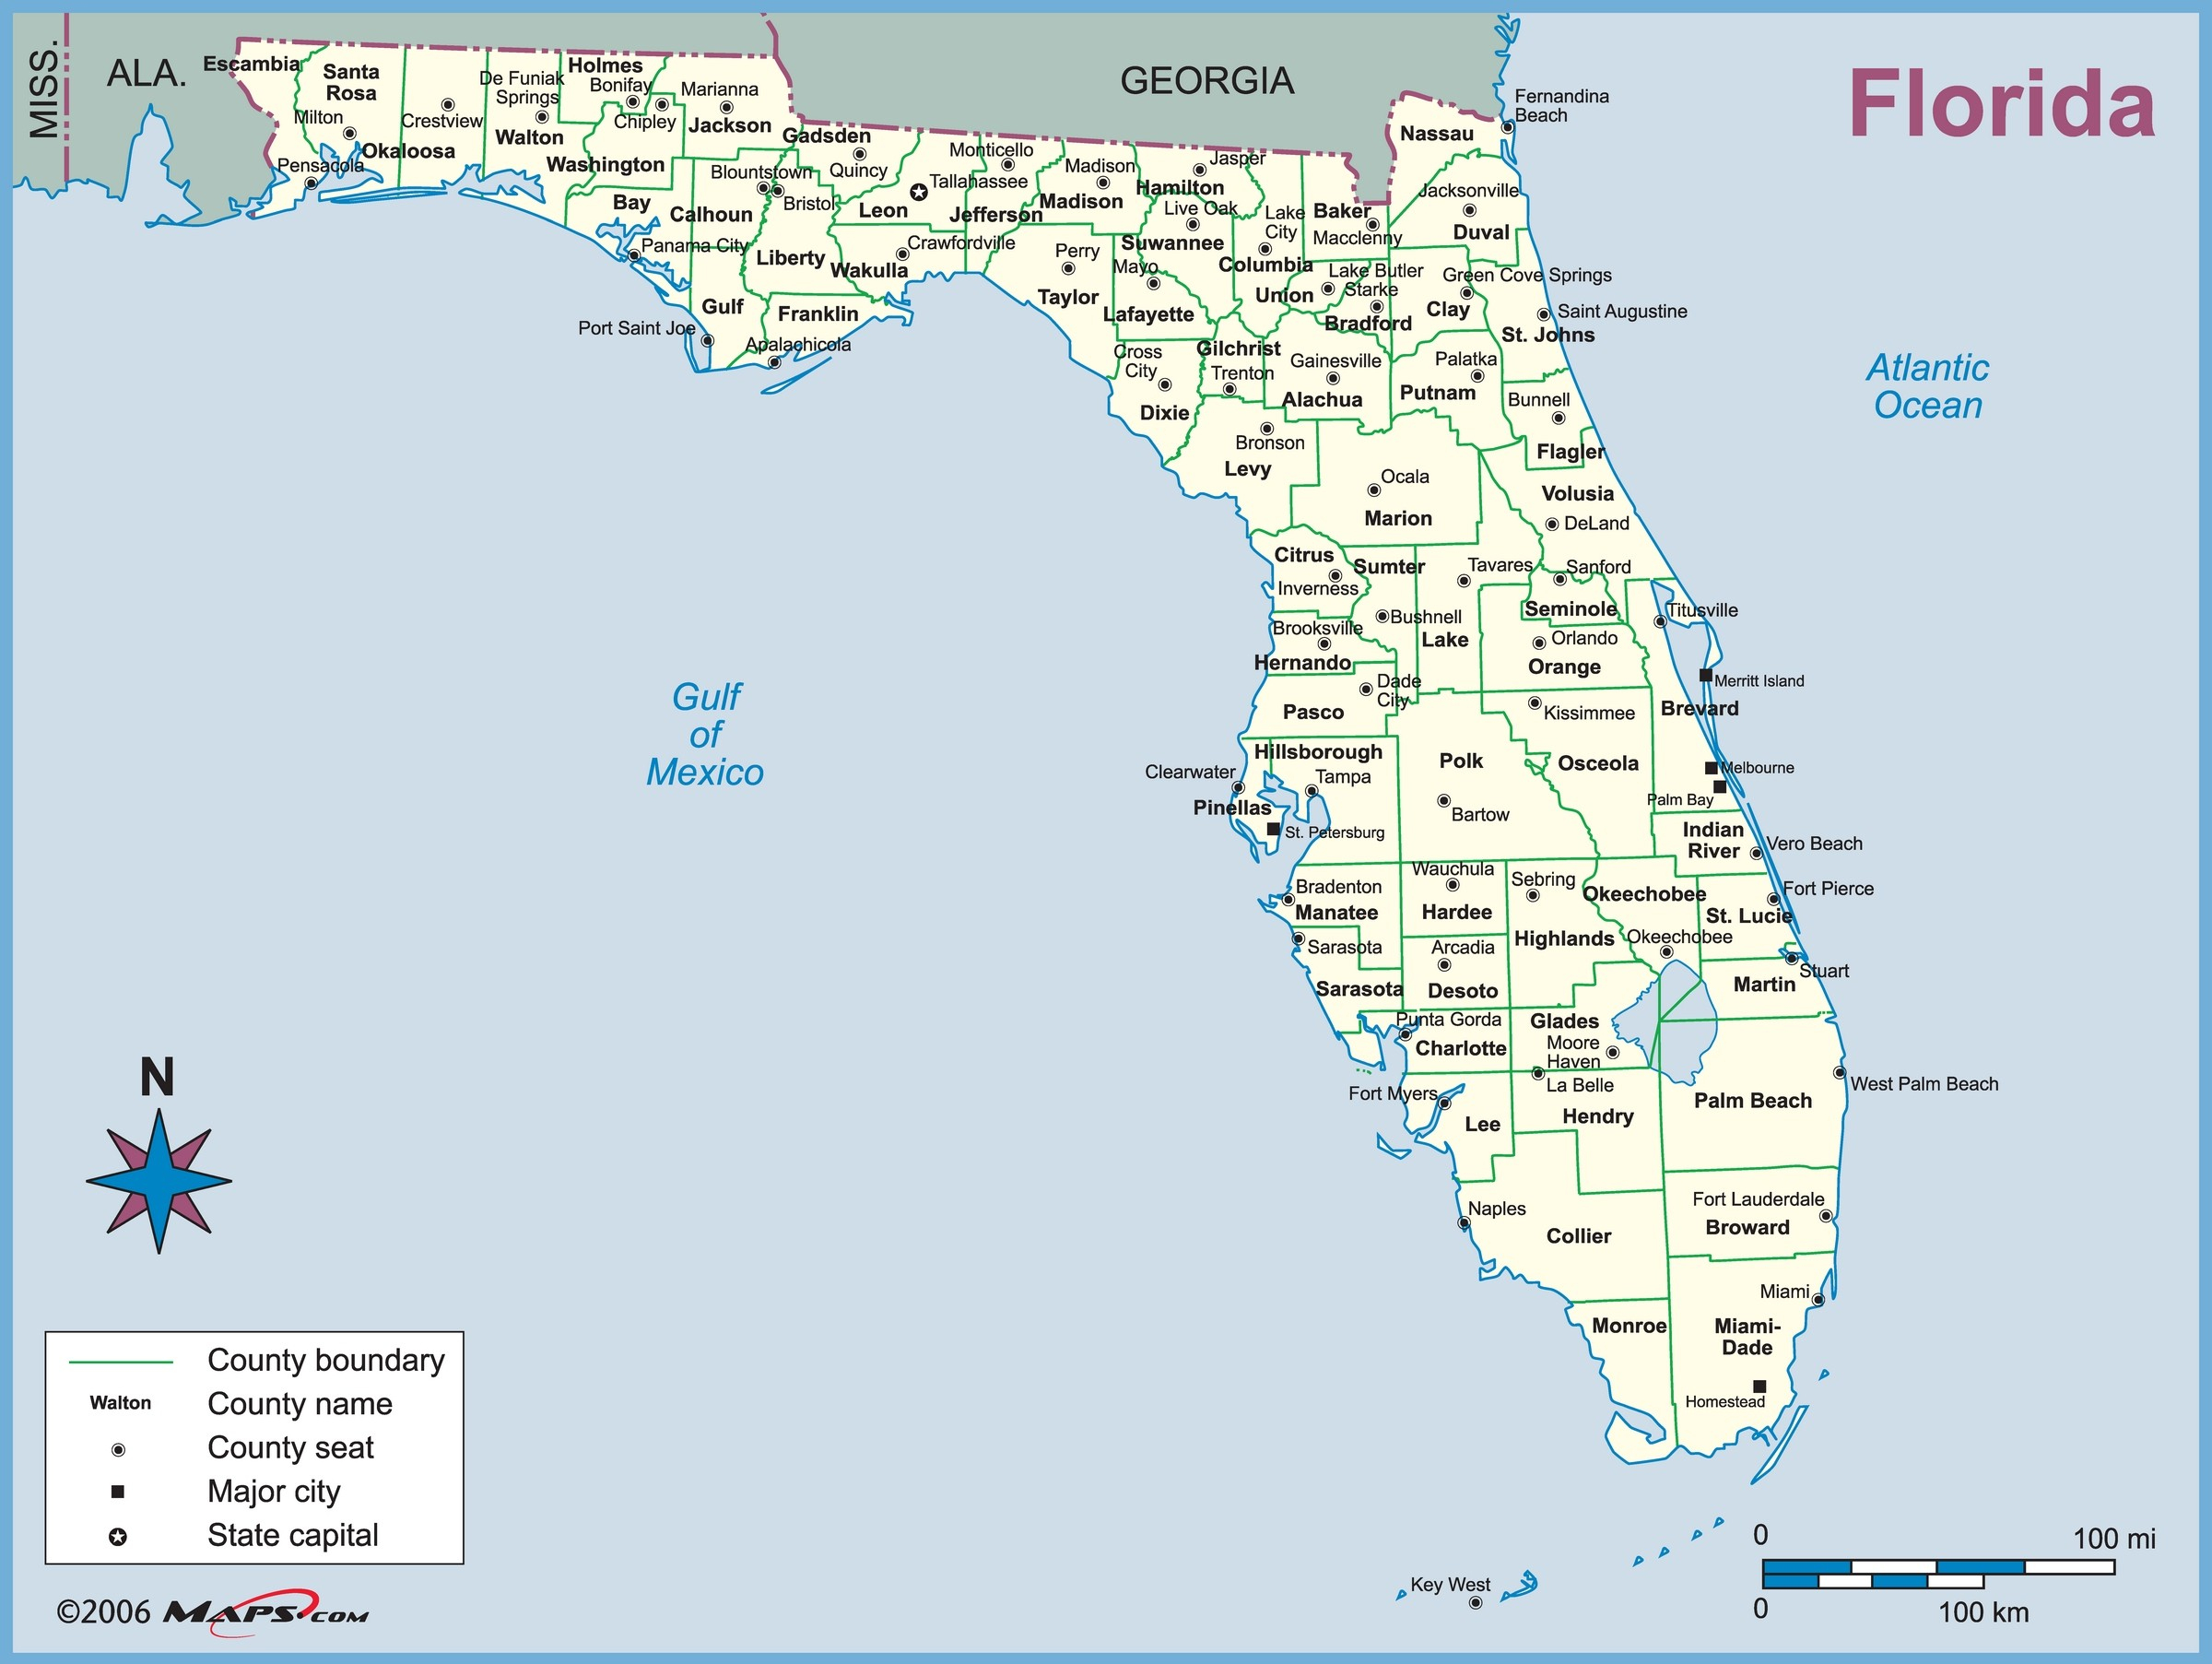 Florida Map With Counties With Florida Cou - Belle Glade Florida Map